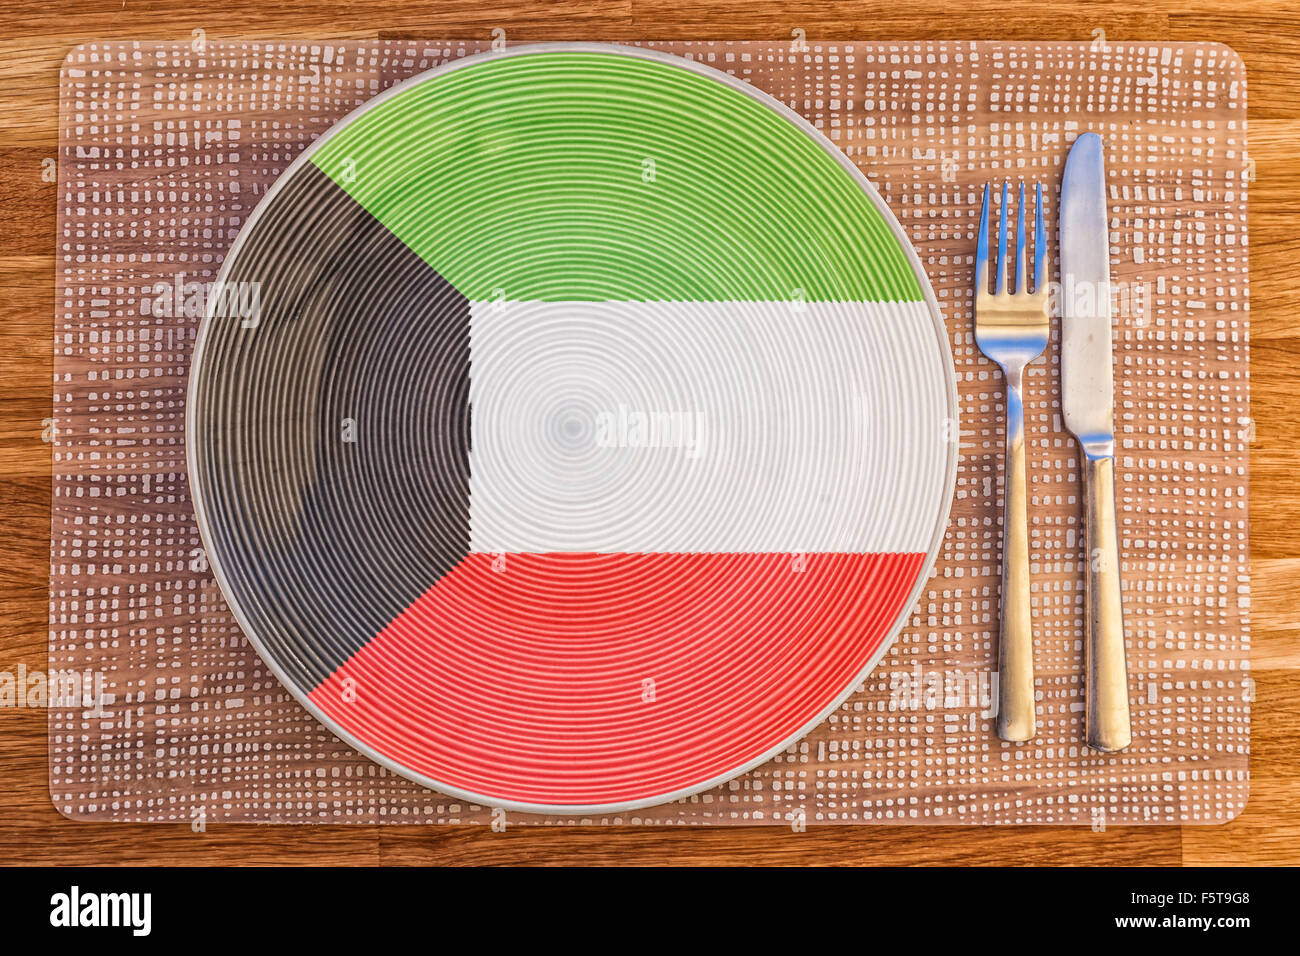 Dinner plate with the flag of Kuwait on it for your international food and drink concepts. Stock Photo